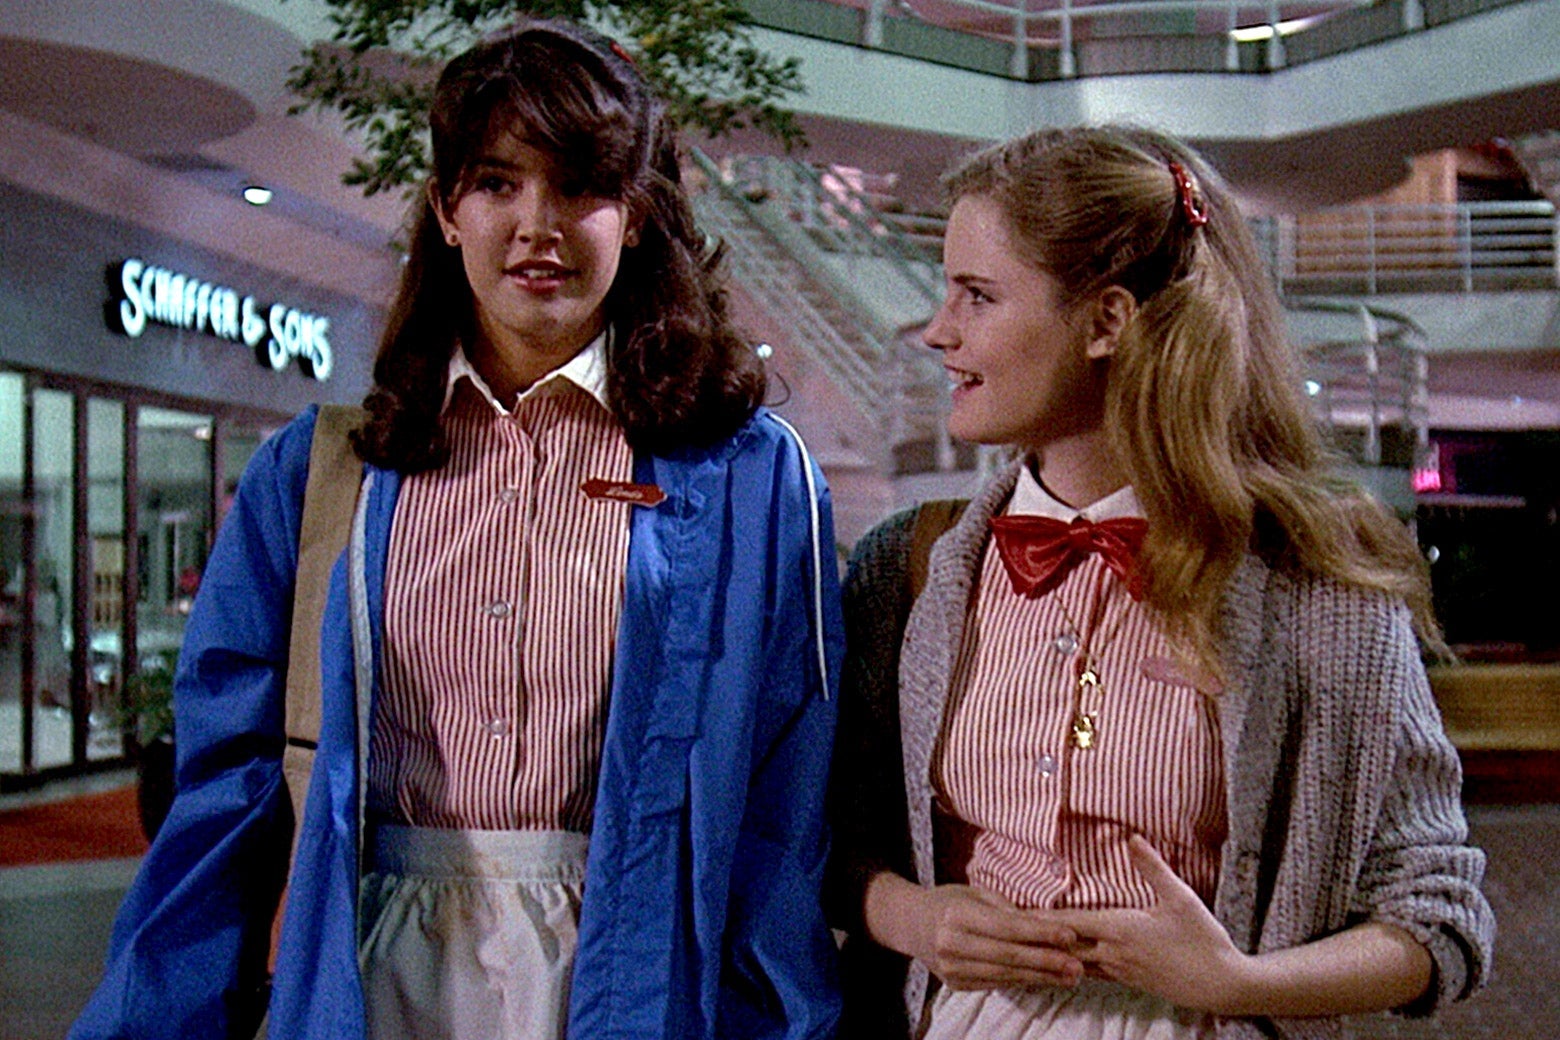 Two teen girls wearing red and white striped restaurant uniforms talking in a mall